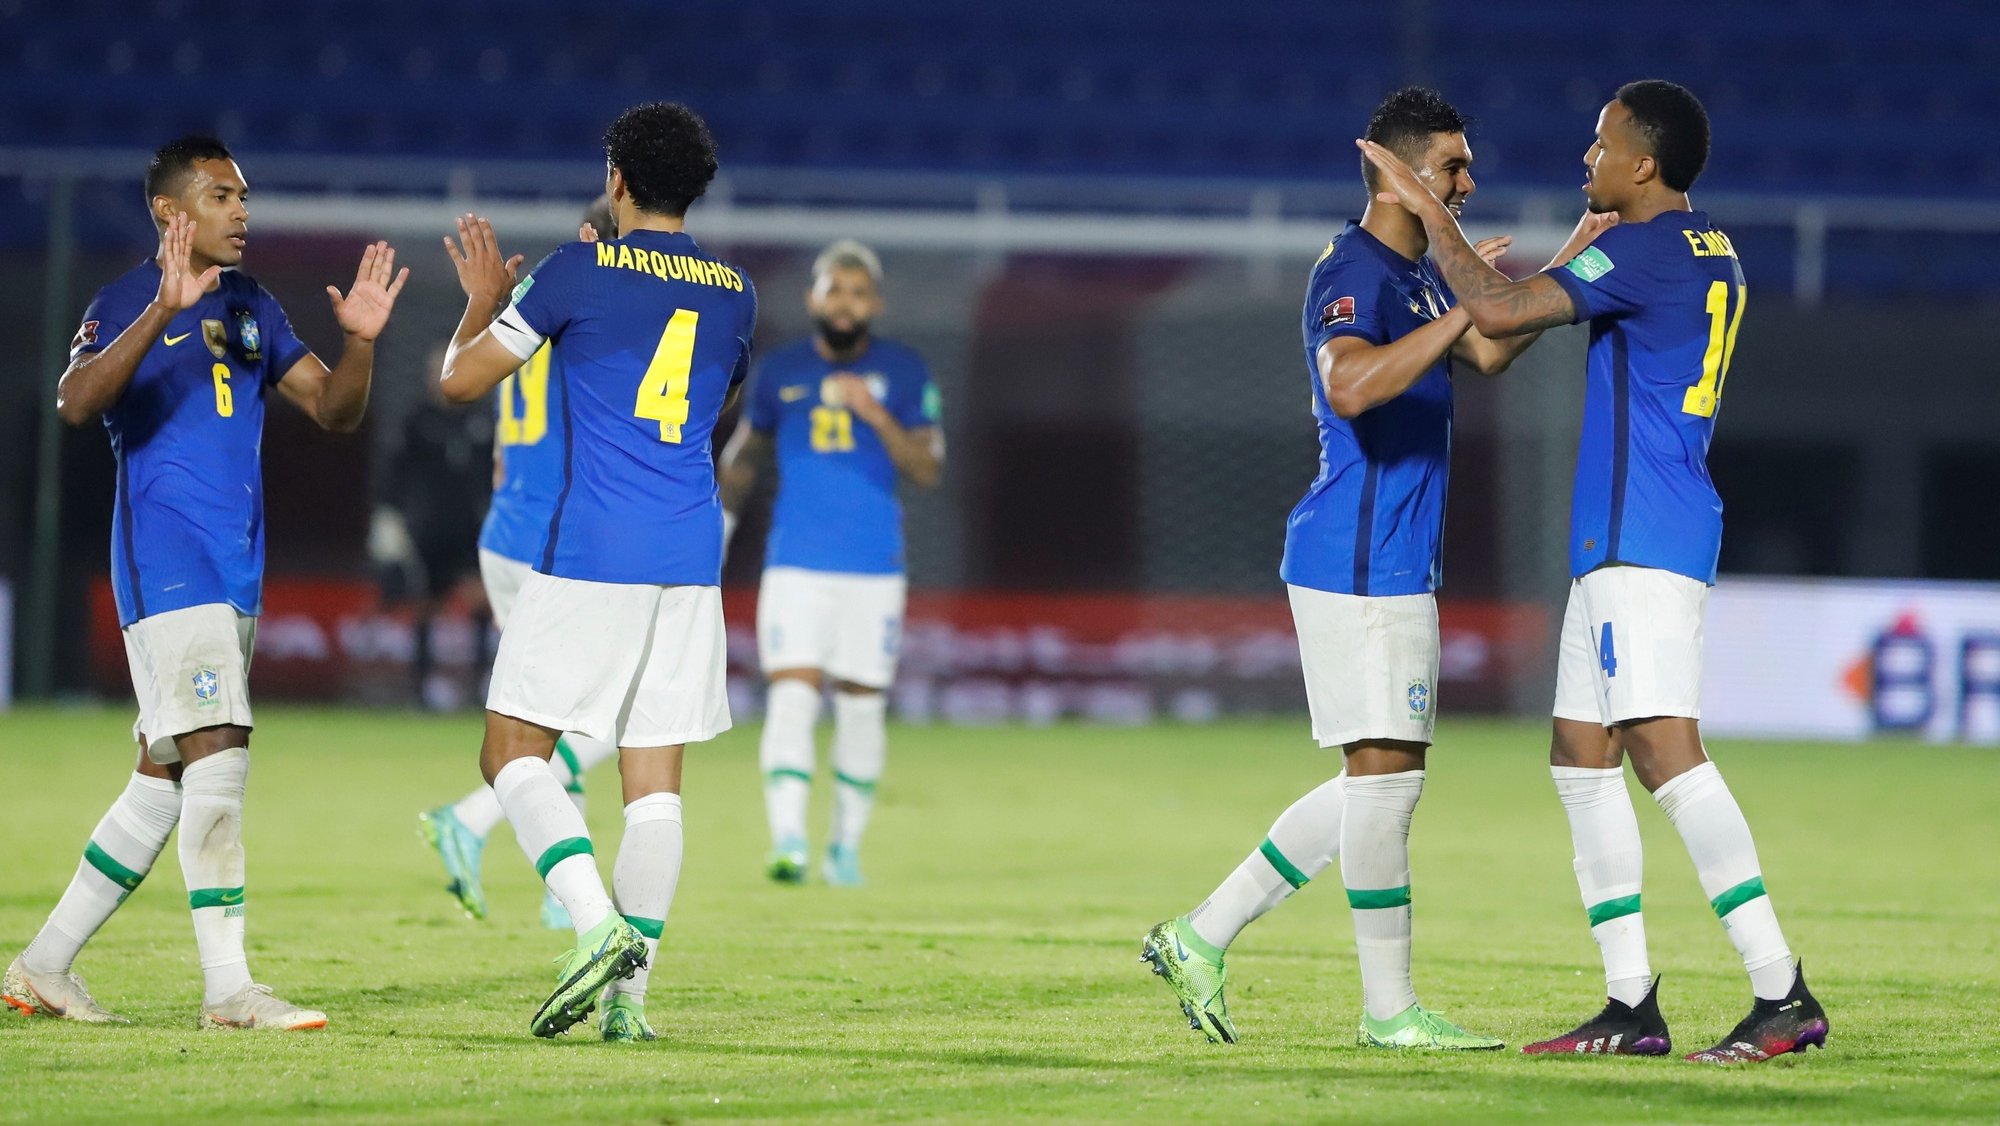 epa09256437 Brazil players celebrate during a South American qualifying match between Paraguay and Brazil for the Qatar 2022 World Cup at the Defensores del Chaco stadium in Asuncion, Paraguay, 08 June 2021.  EPA/NATHALIA AGUILAR